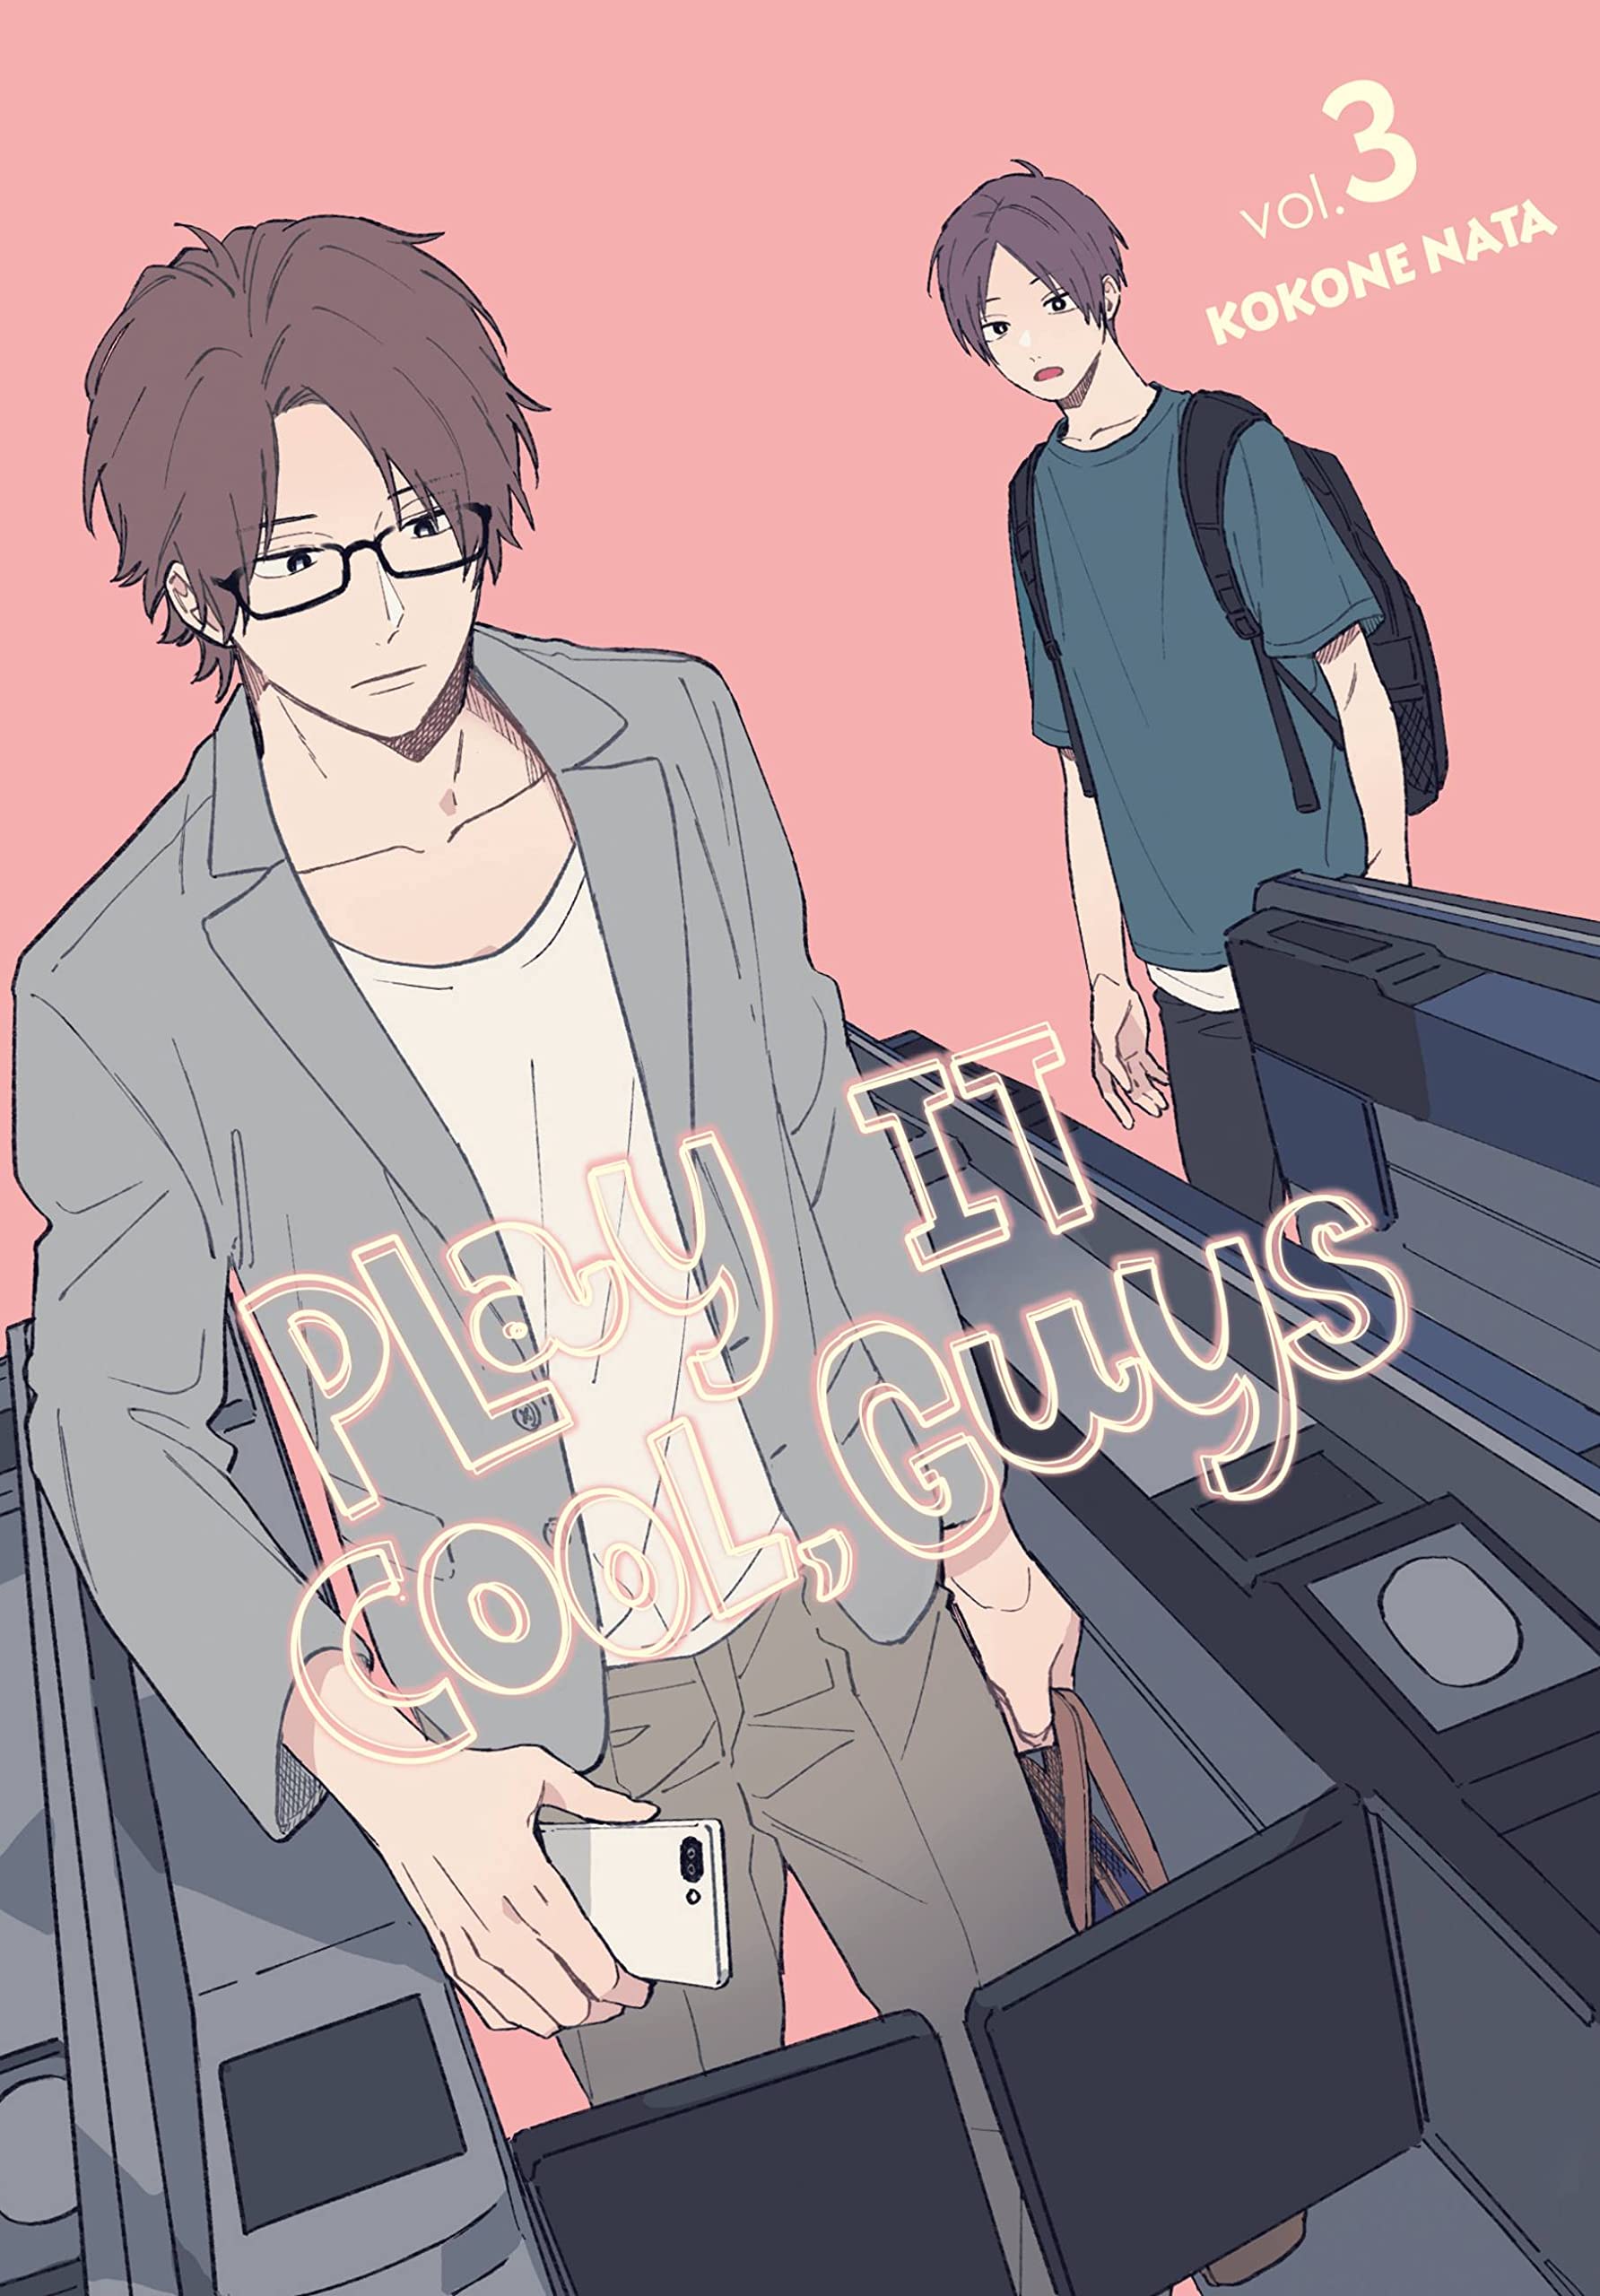 Slice of Life Story of Clumsy (but cute) Guys [Play It Cool, Guys